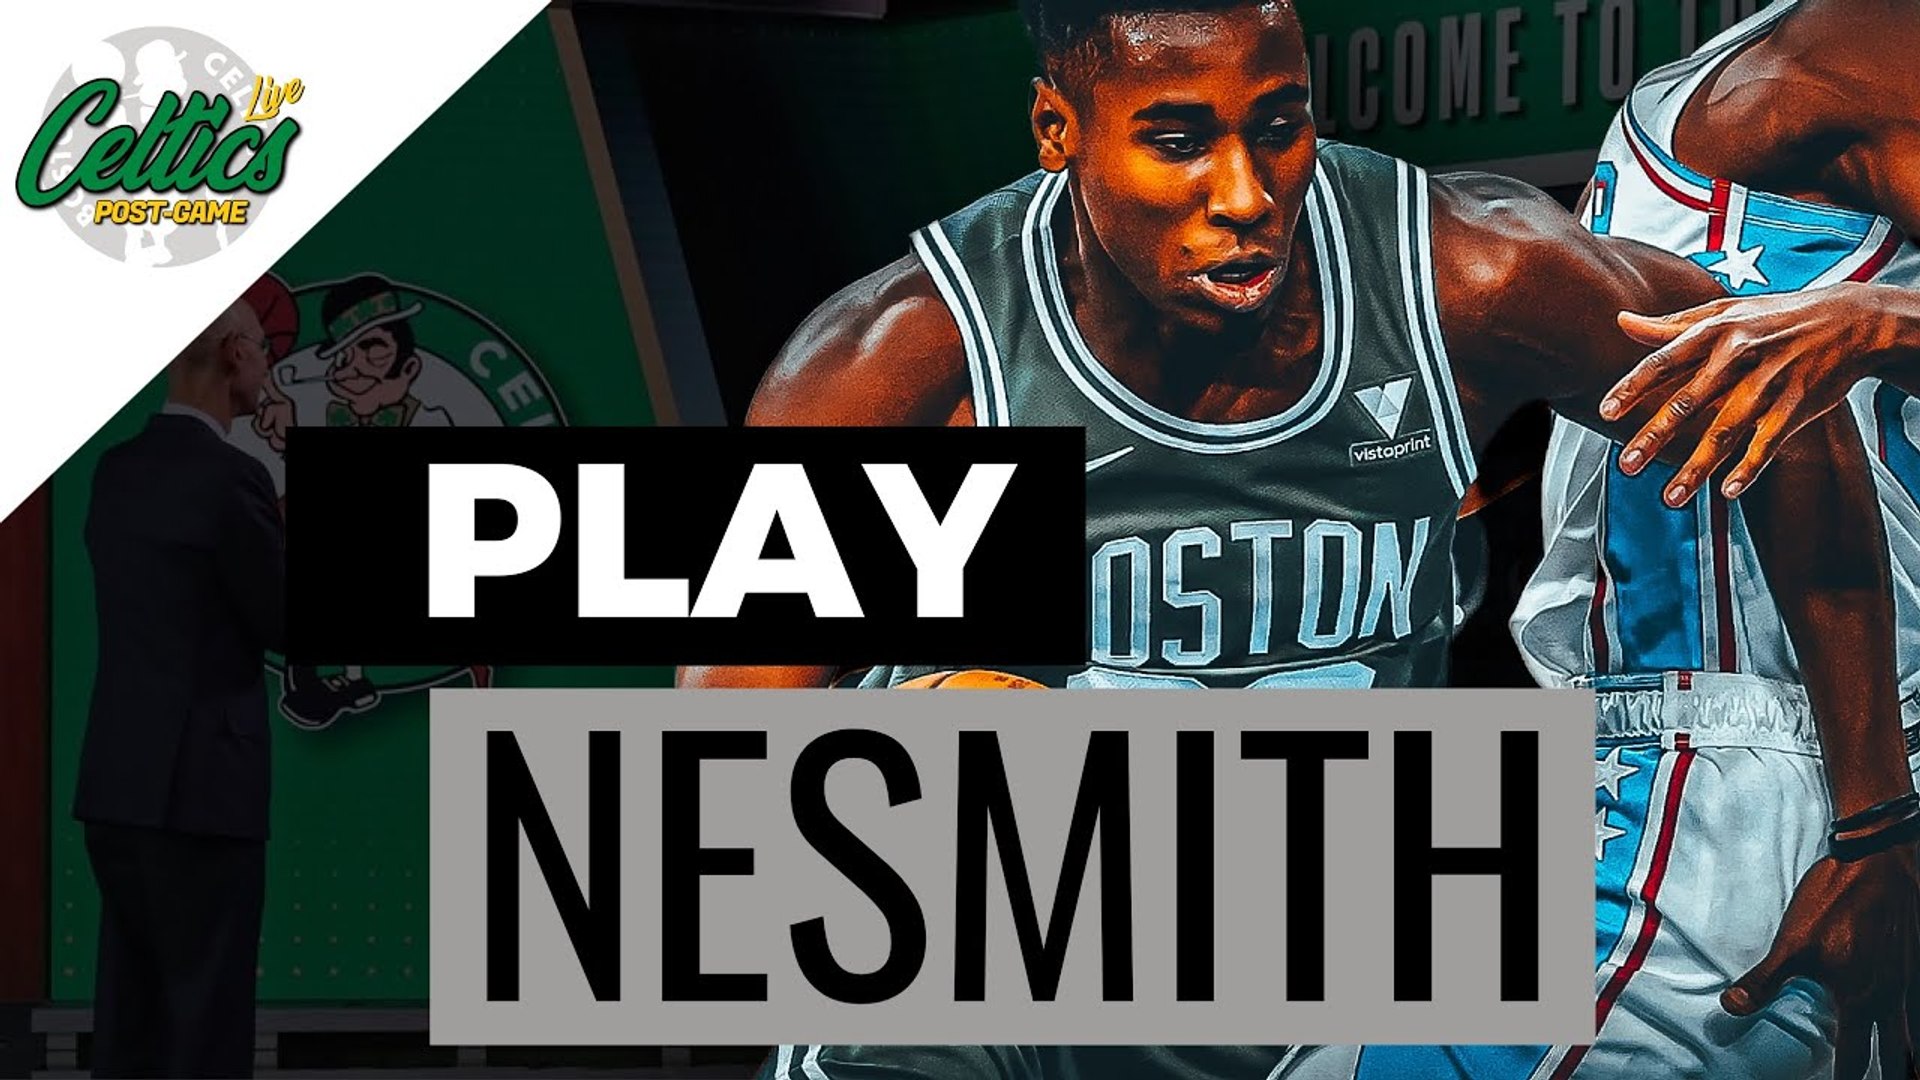 Aaron Nesmith and Payton Pritchard introduced by Celtics - CLNS Media